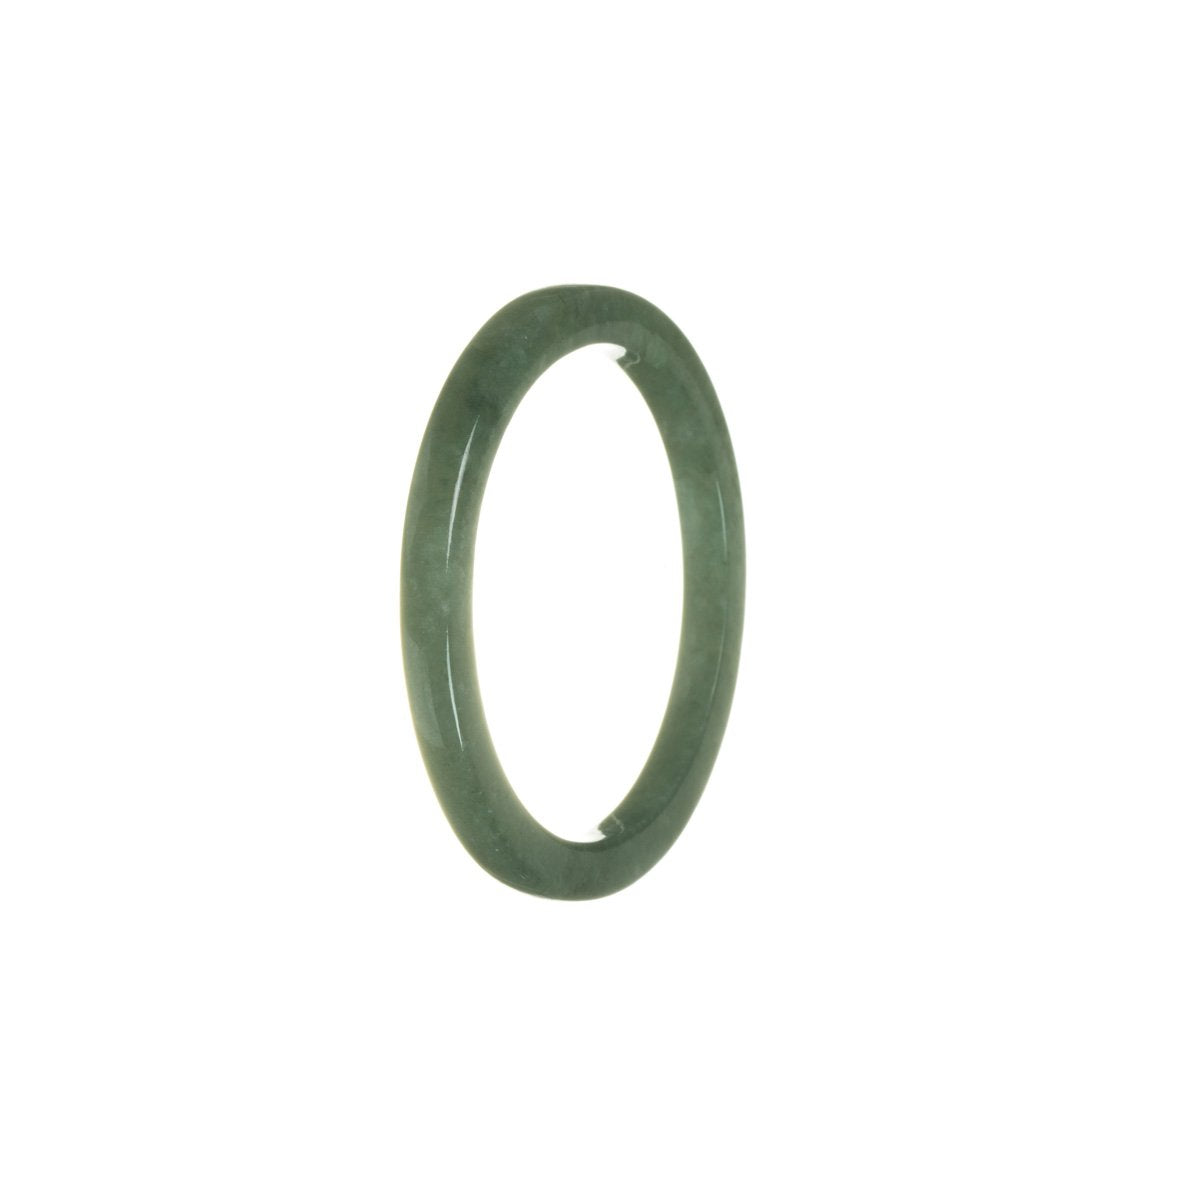 Authentic Type A Green Jadeite Bangle Bracelet - 54mm Oval